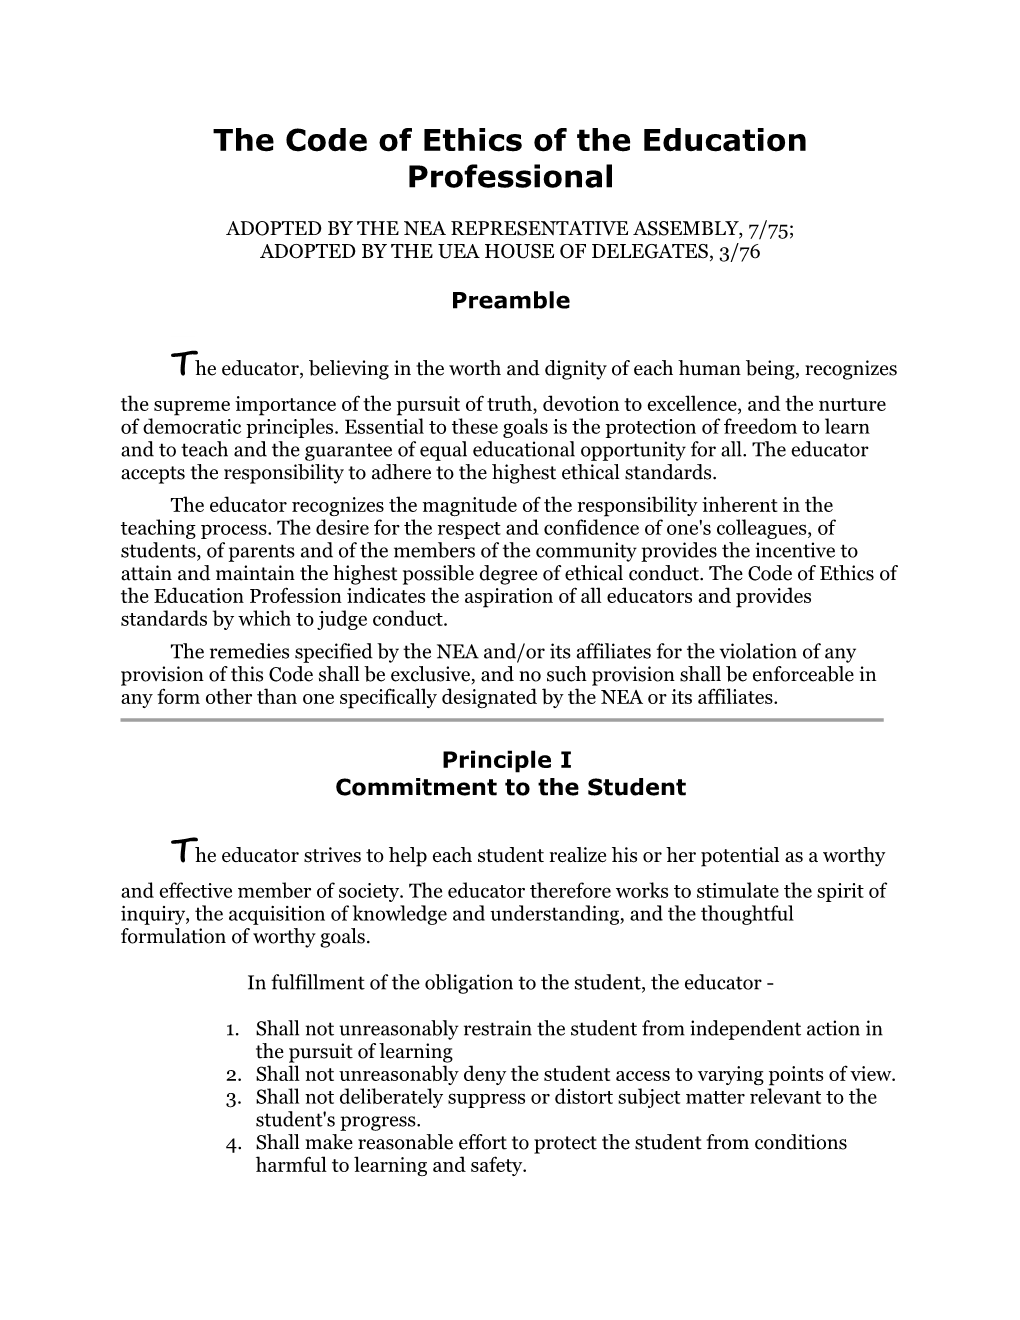 The Code of Ethics of the Education Professional